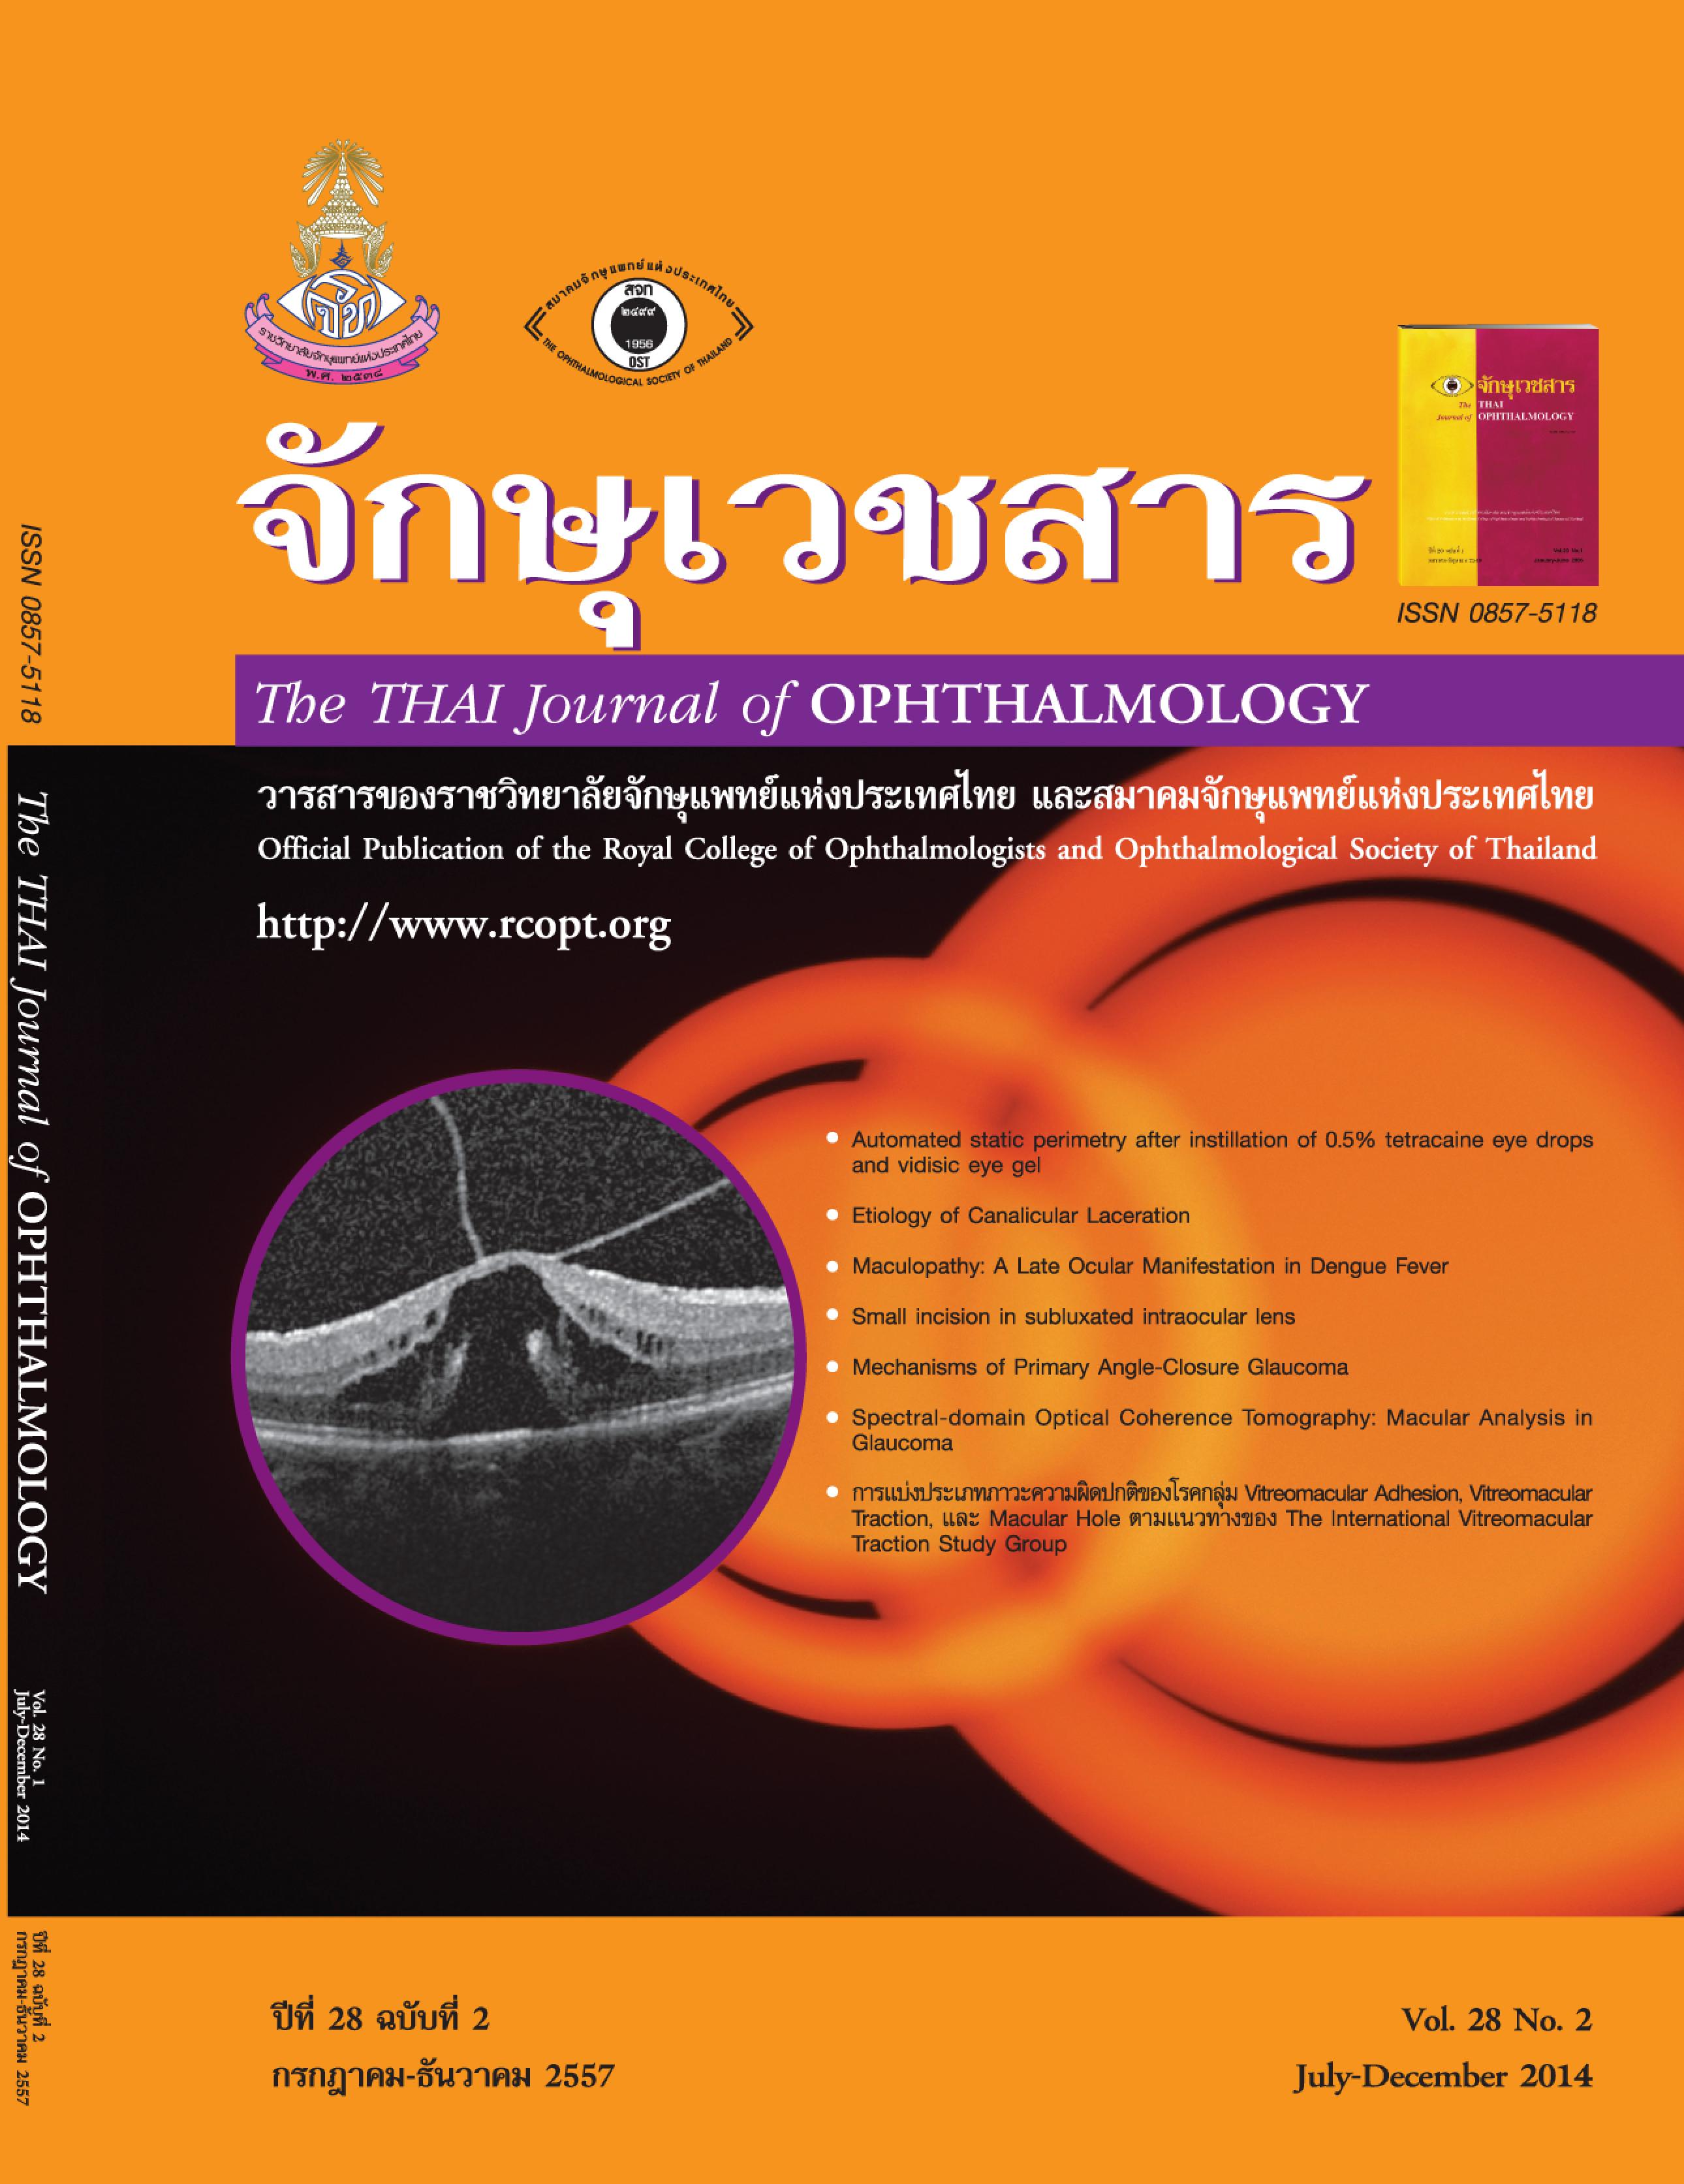 cover Ophthalmo J 28 2 2014.jpg